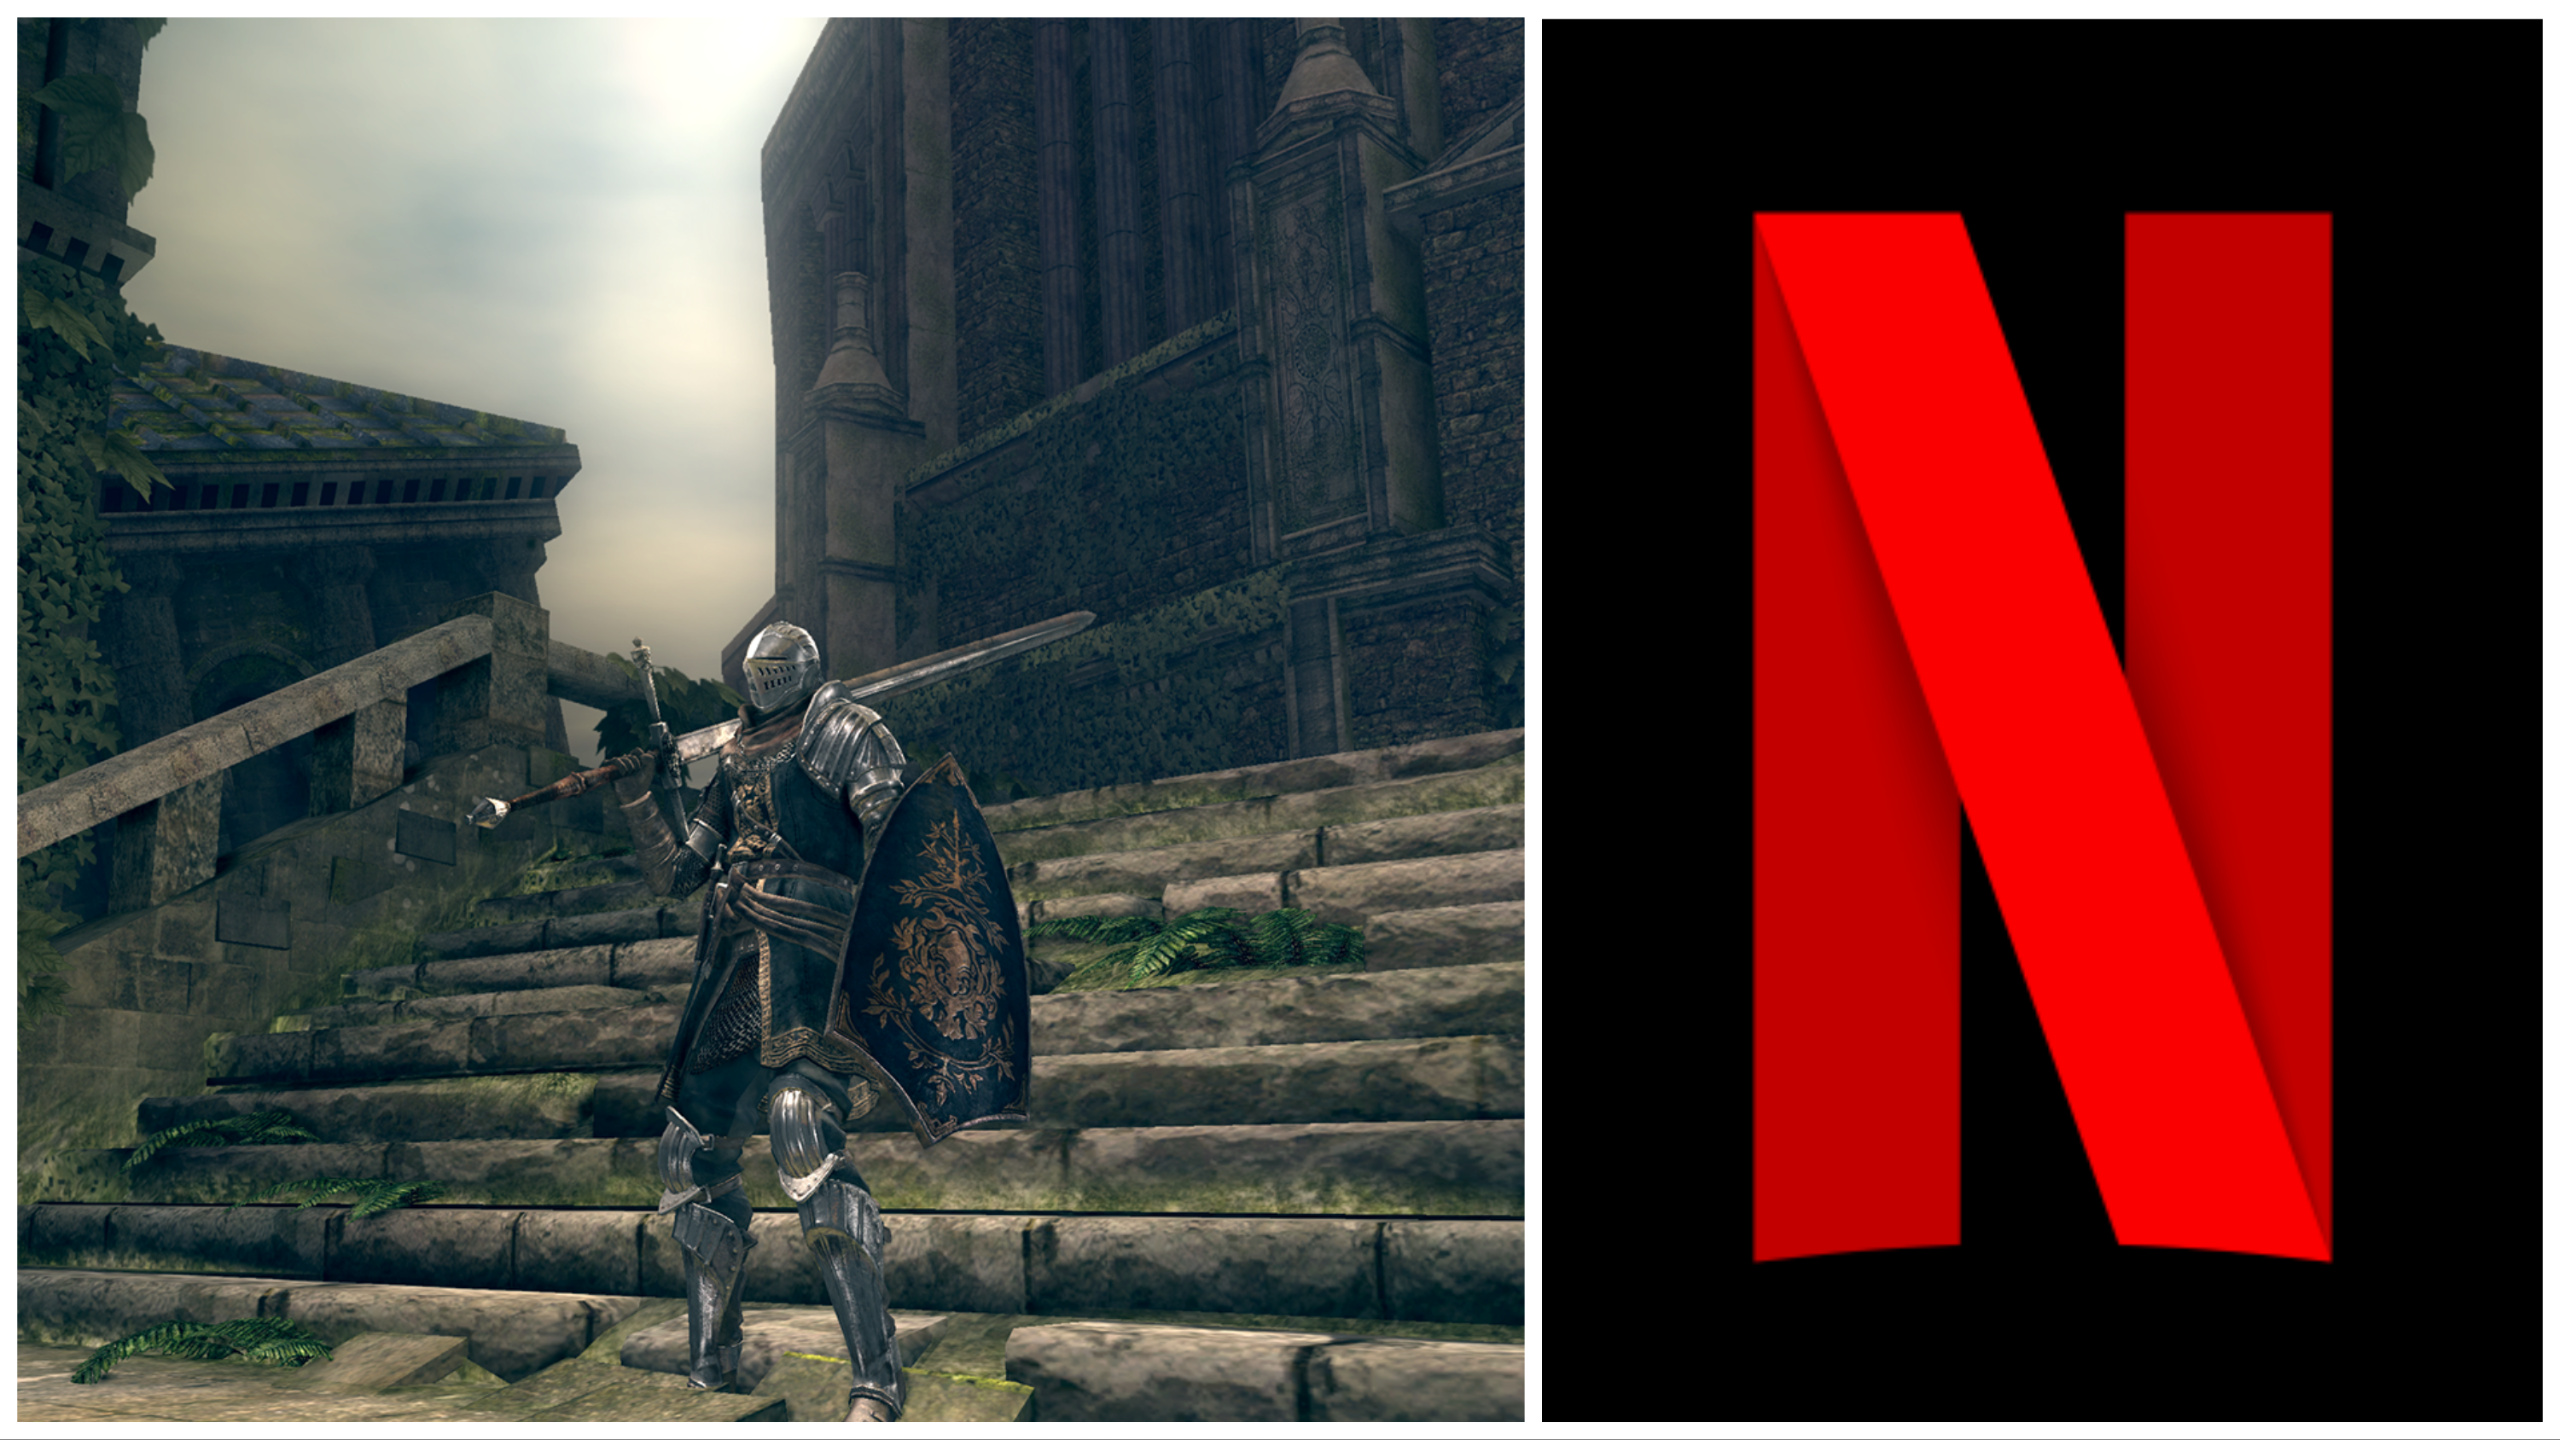 Dark Souls reportedly being turned into Netflix anime